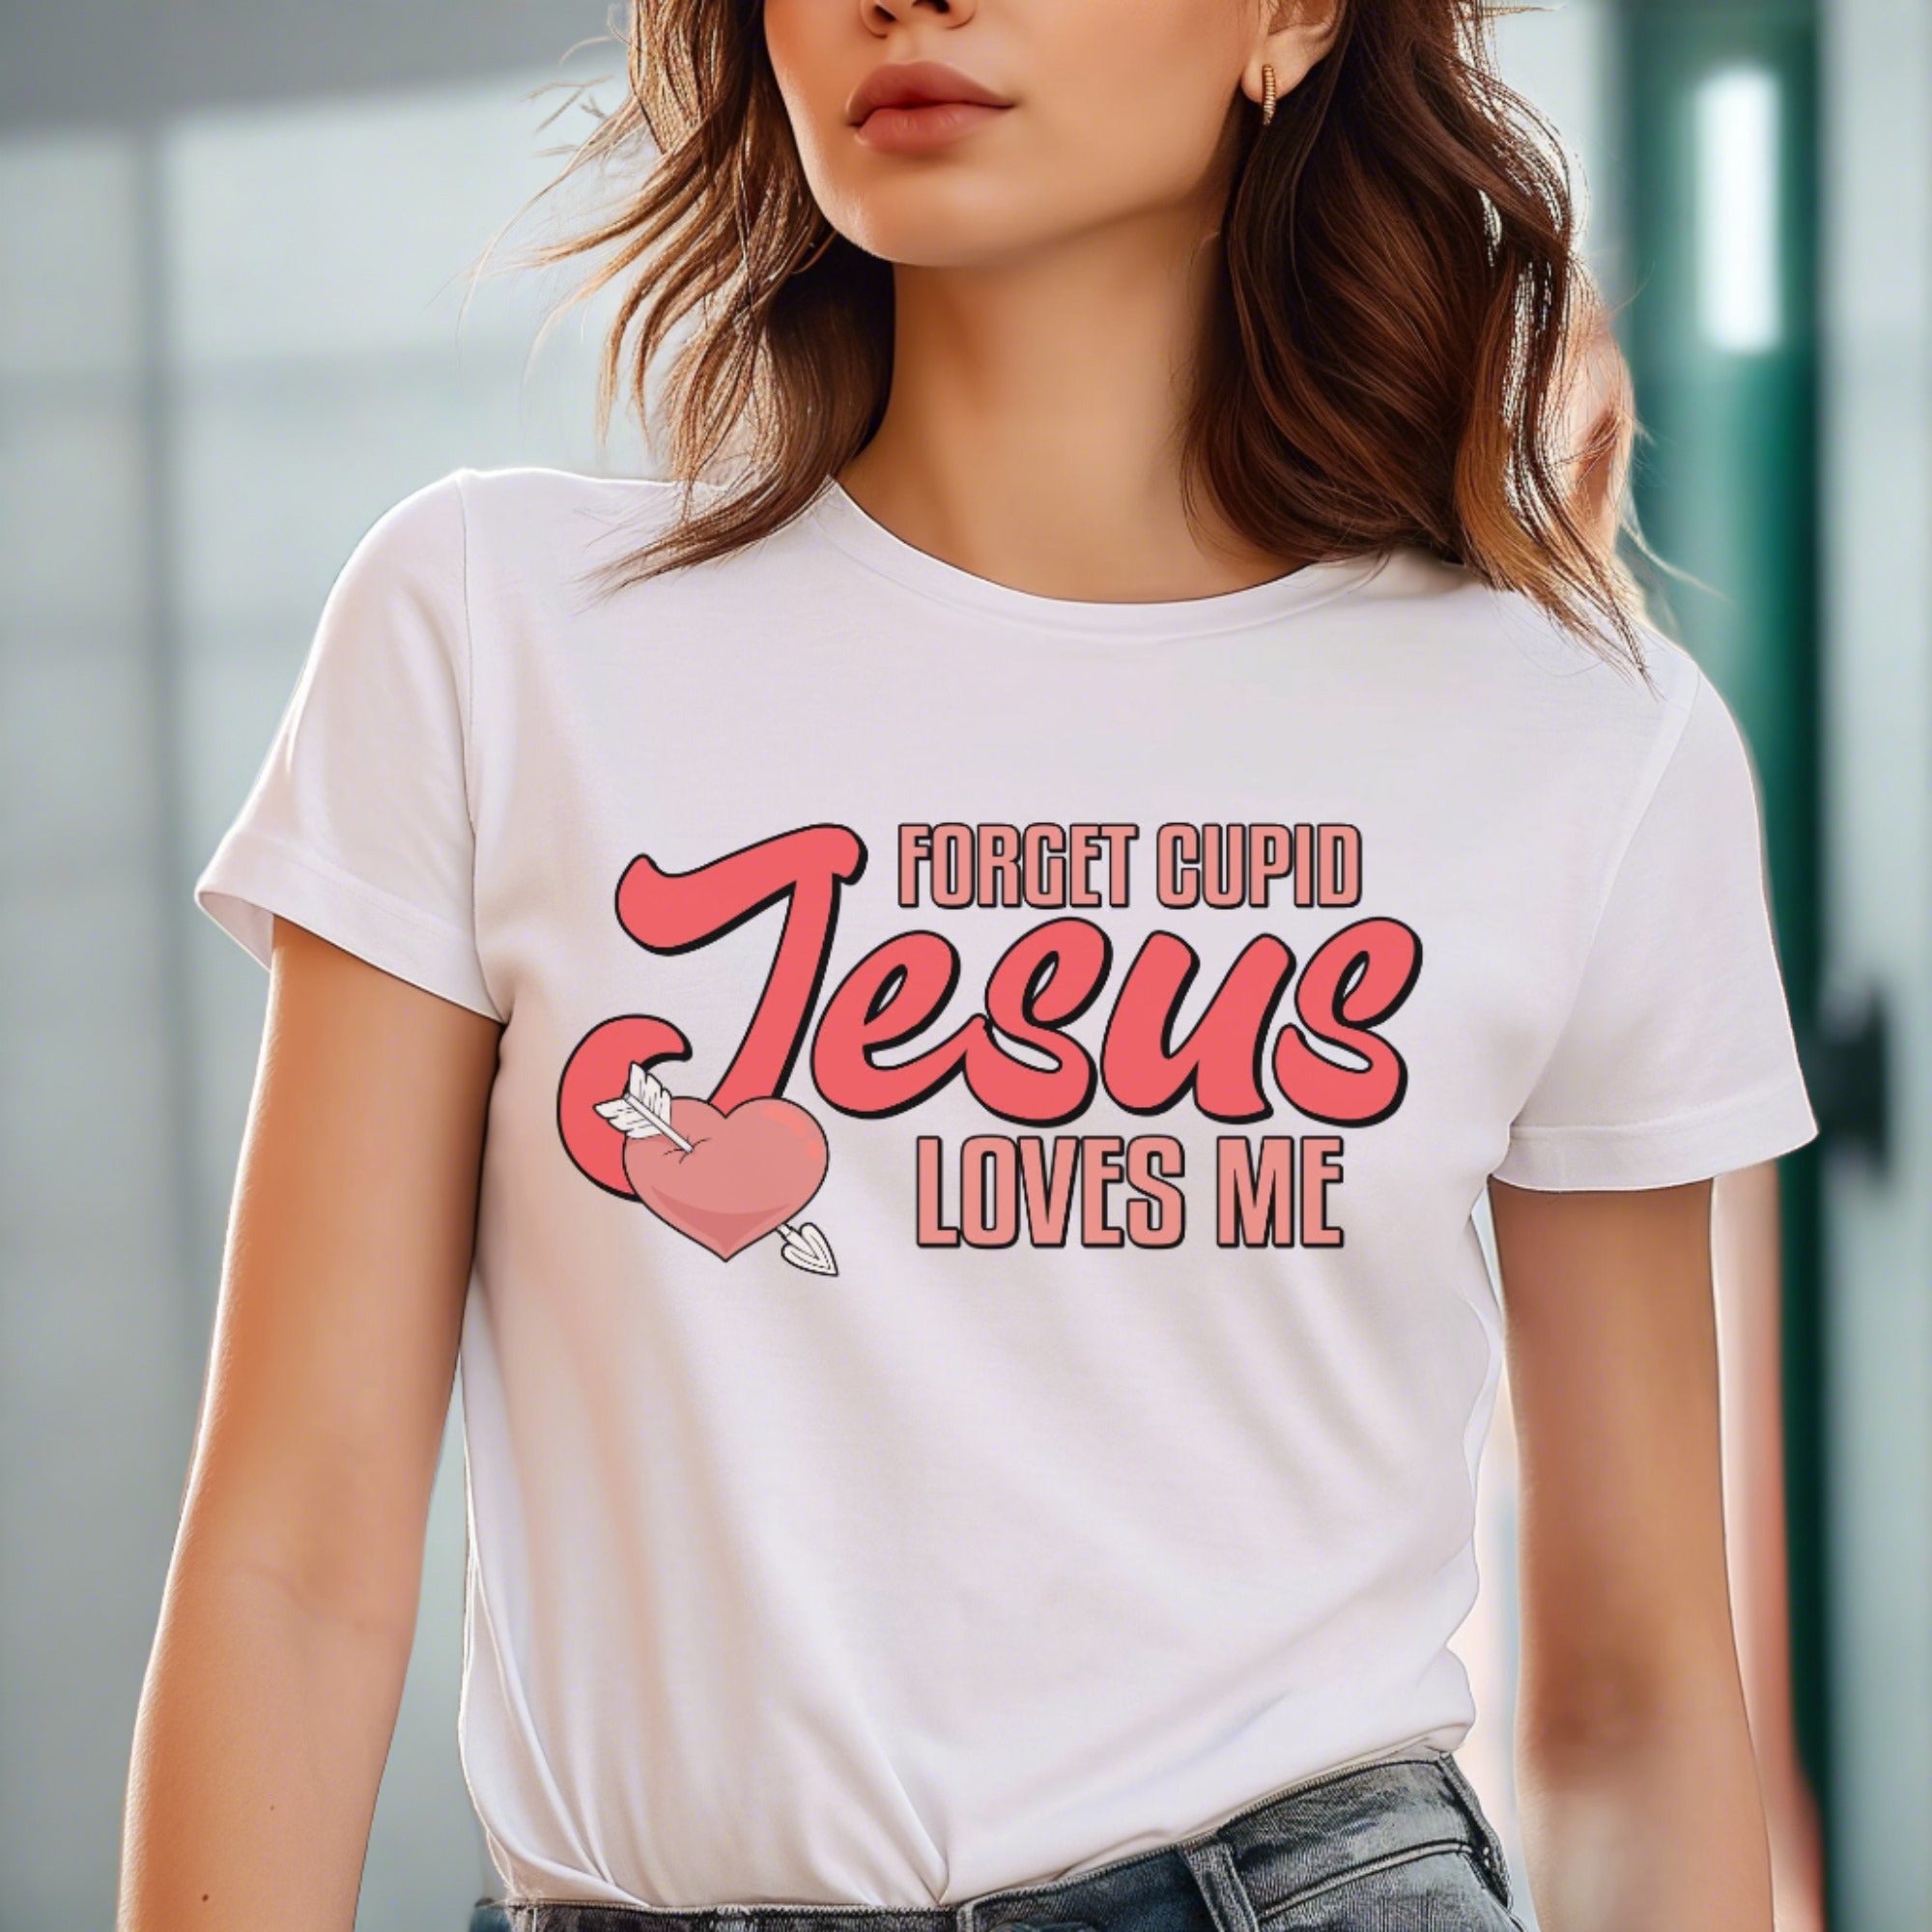 Jesus Loves Me Unisex Jersey Short Sleeve Tee - White Size: XS Color: White Jesus Passion Apparel